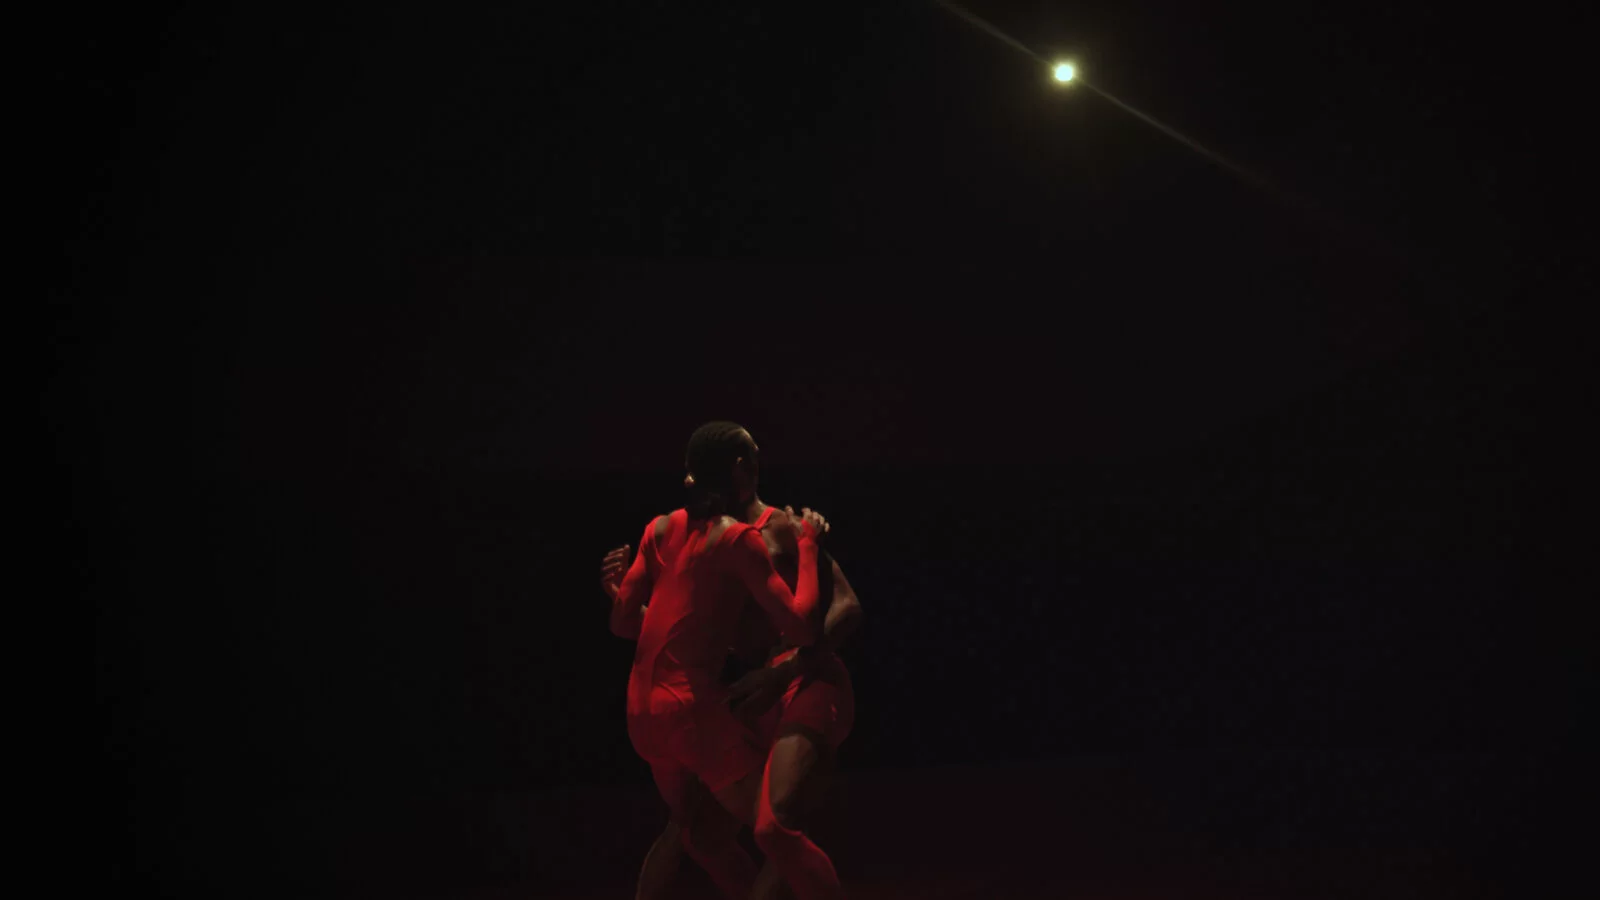 Two performers in a dark room.